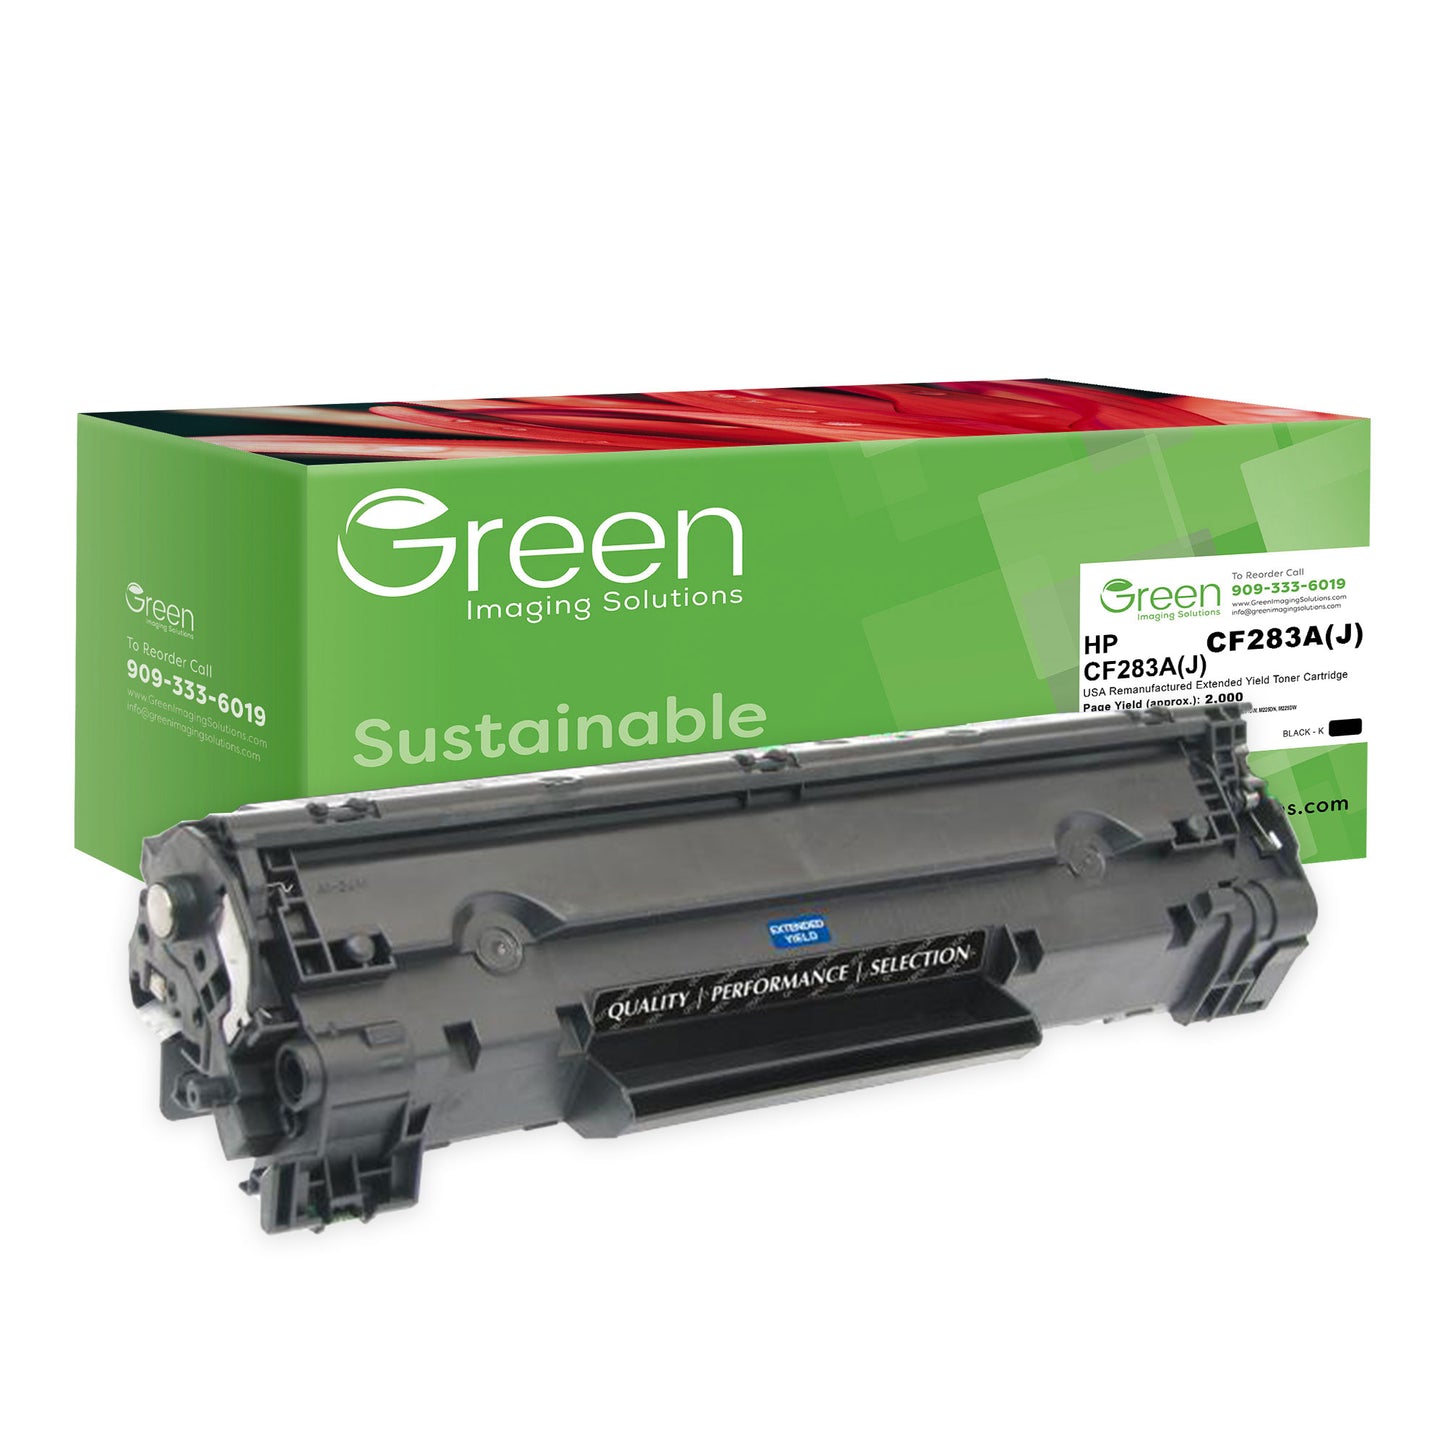 GIS USA Remanufactured Extended Yield Toner Cartridge for HP CF283A